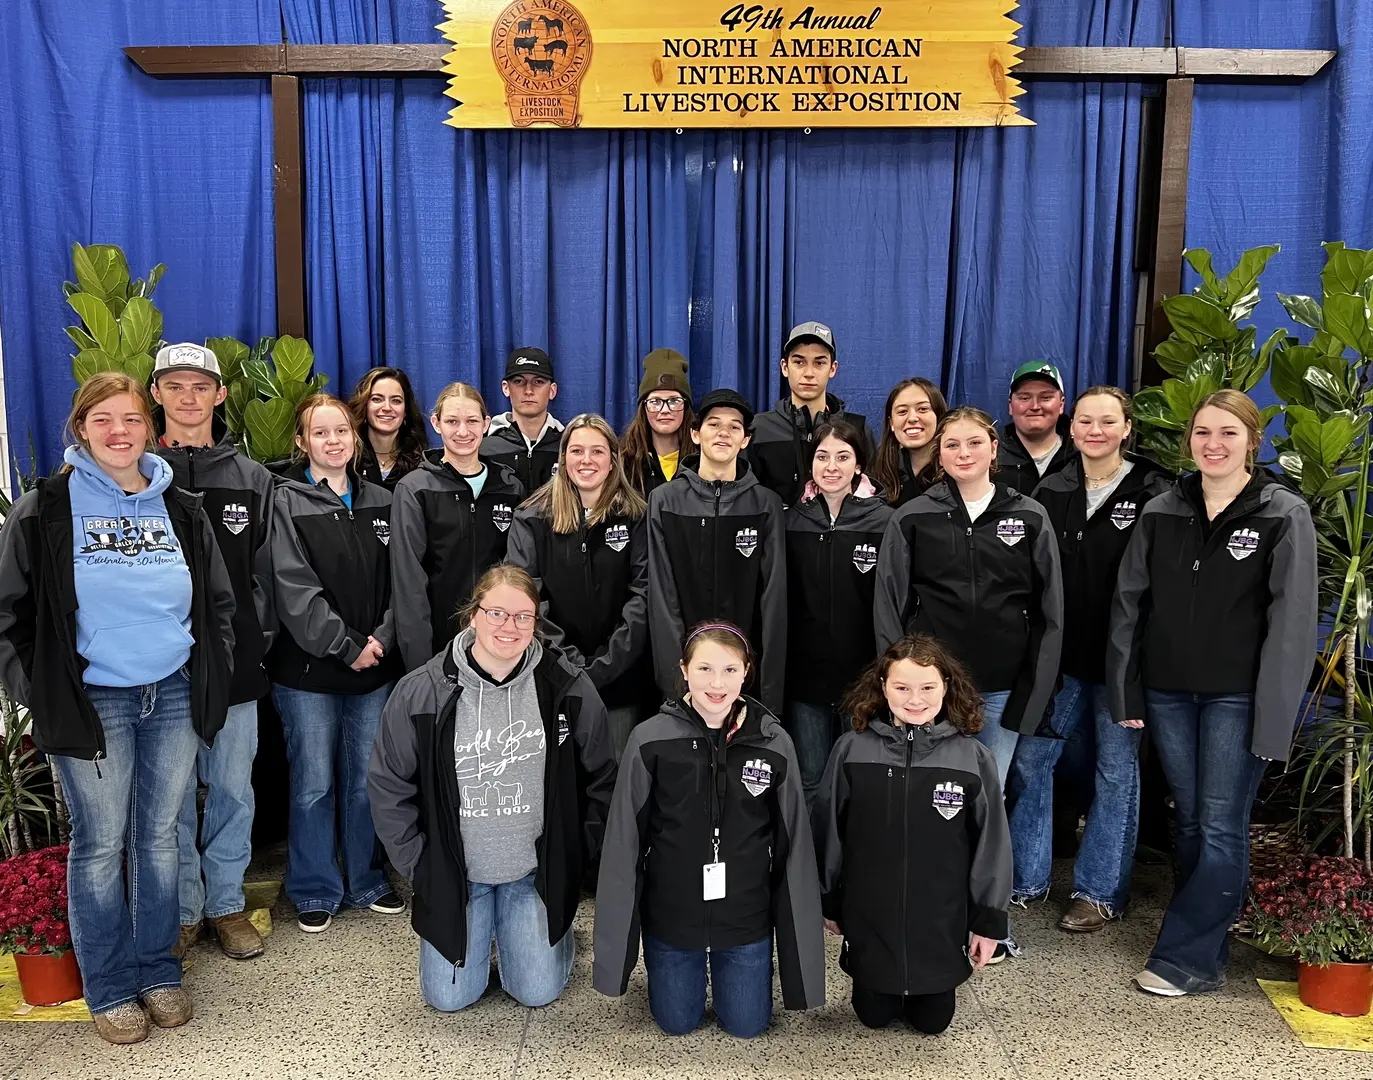 Large group of Belted Galloway Junior Association Members innavy polo shirts and jeans standing in front of blue banner at 2019 North American International Livestock Exposition